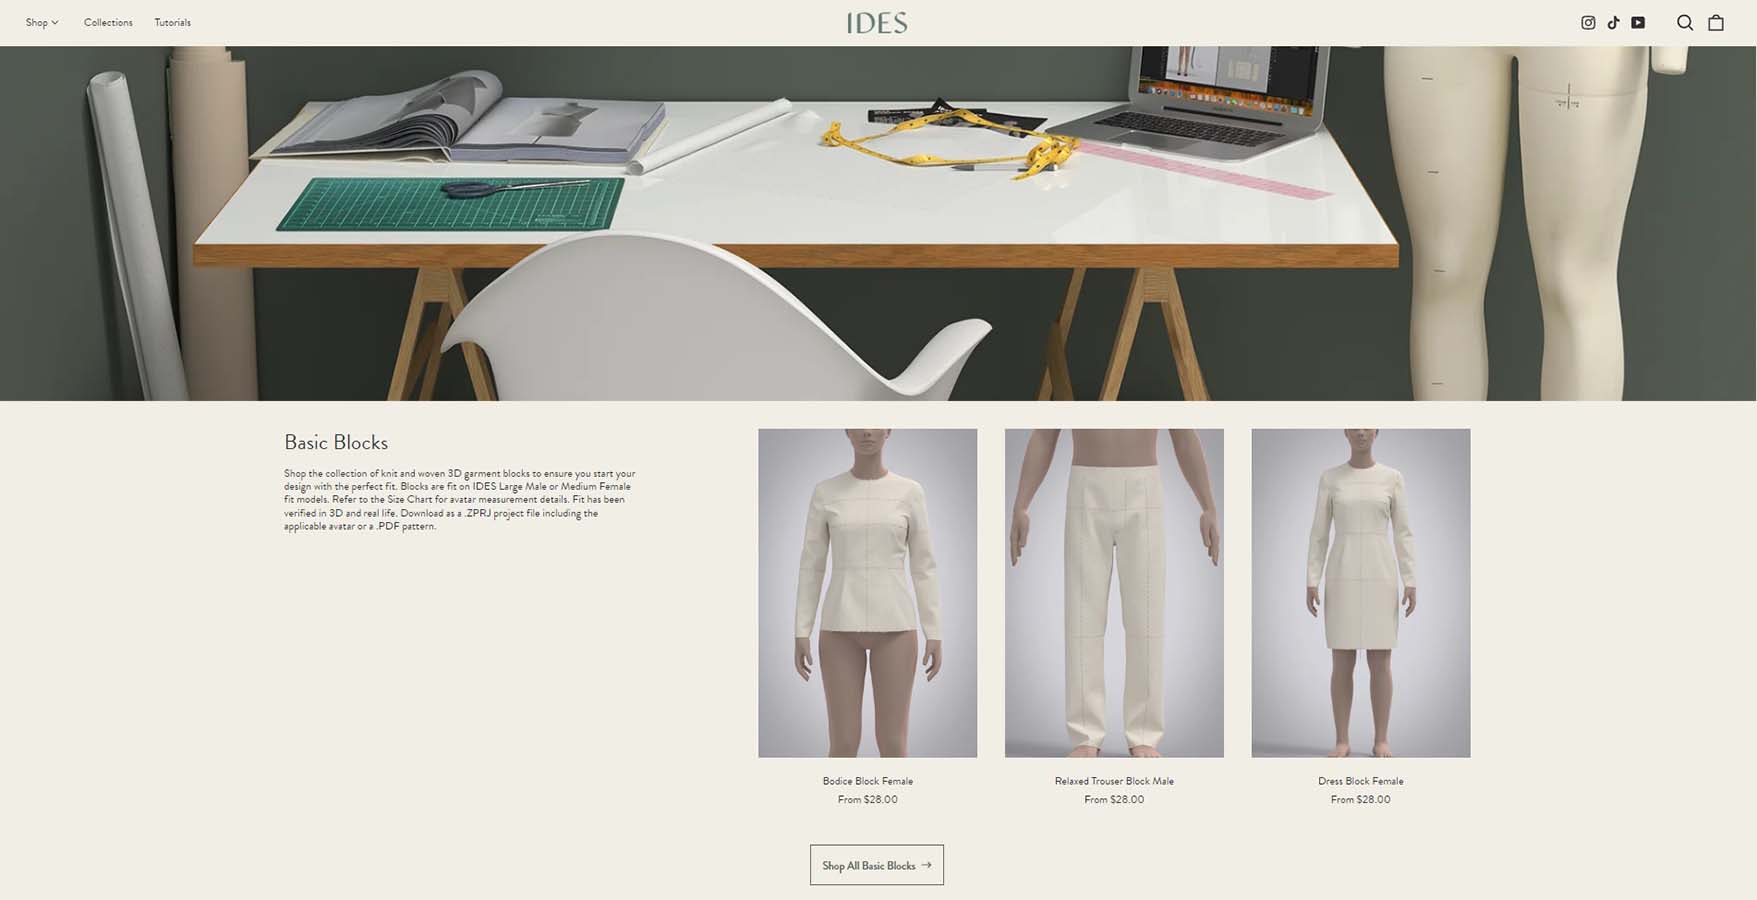 Website screenshot of IDES Basic Block collection. Top image is digital design desk scene, below 3 products from collection.